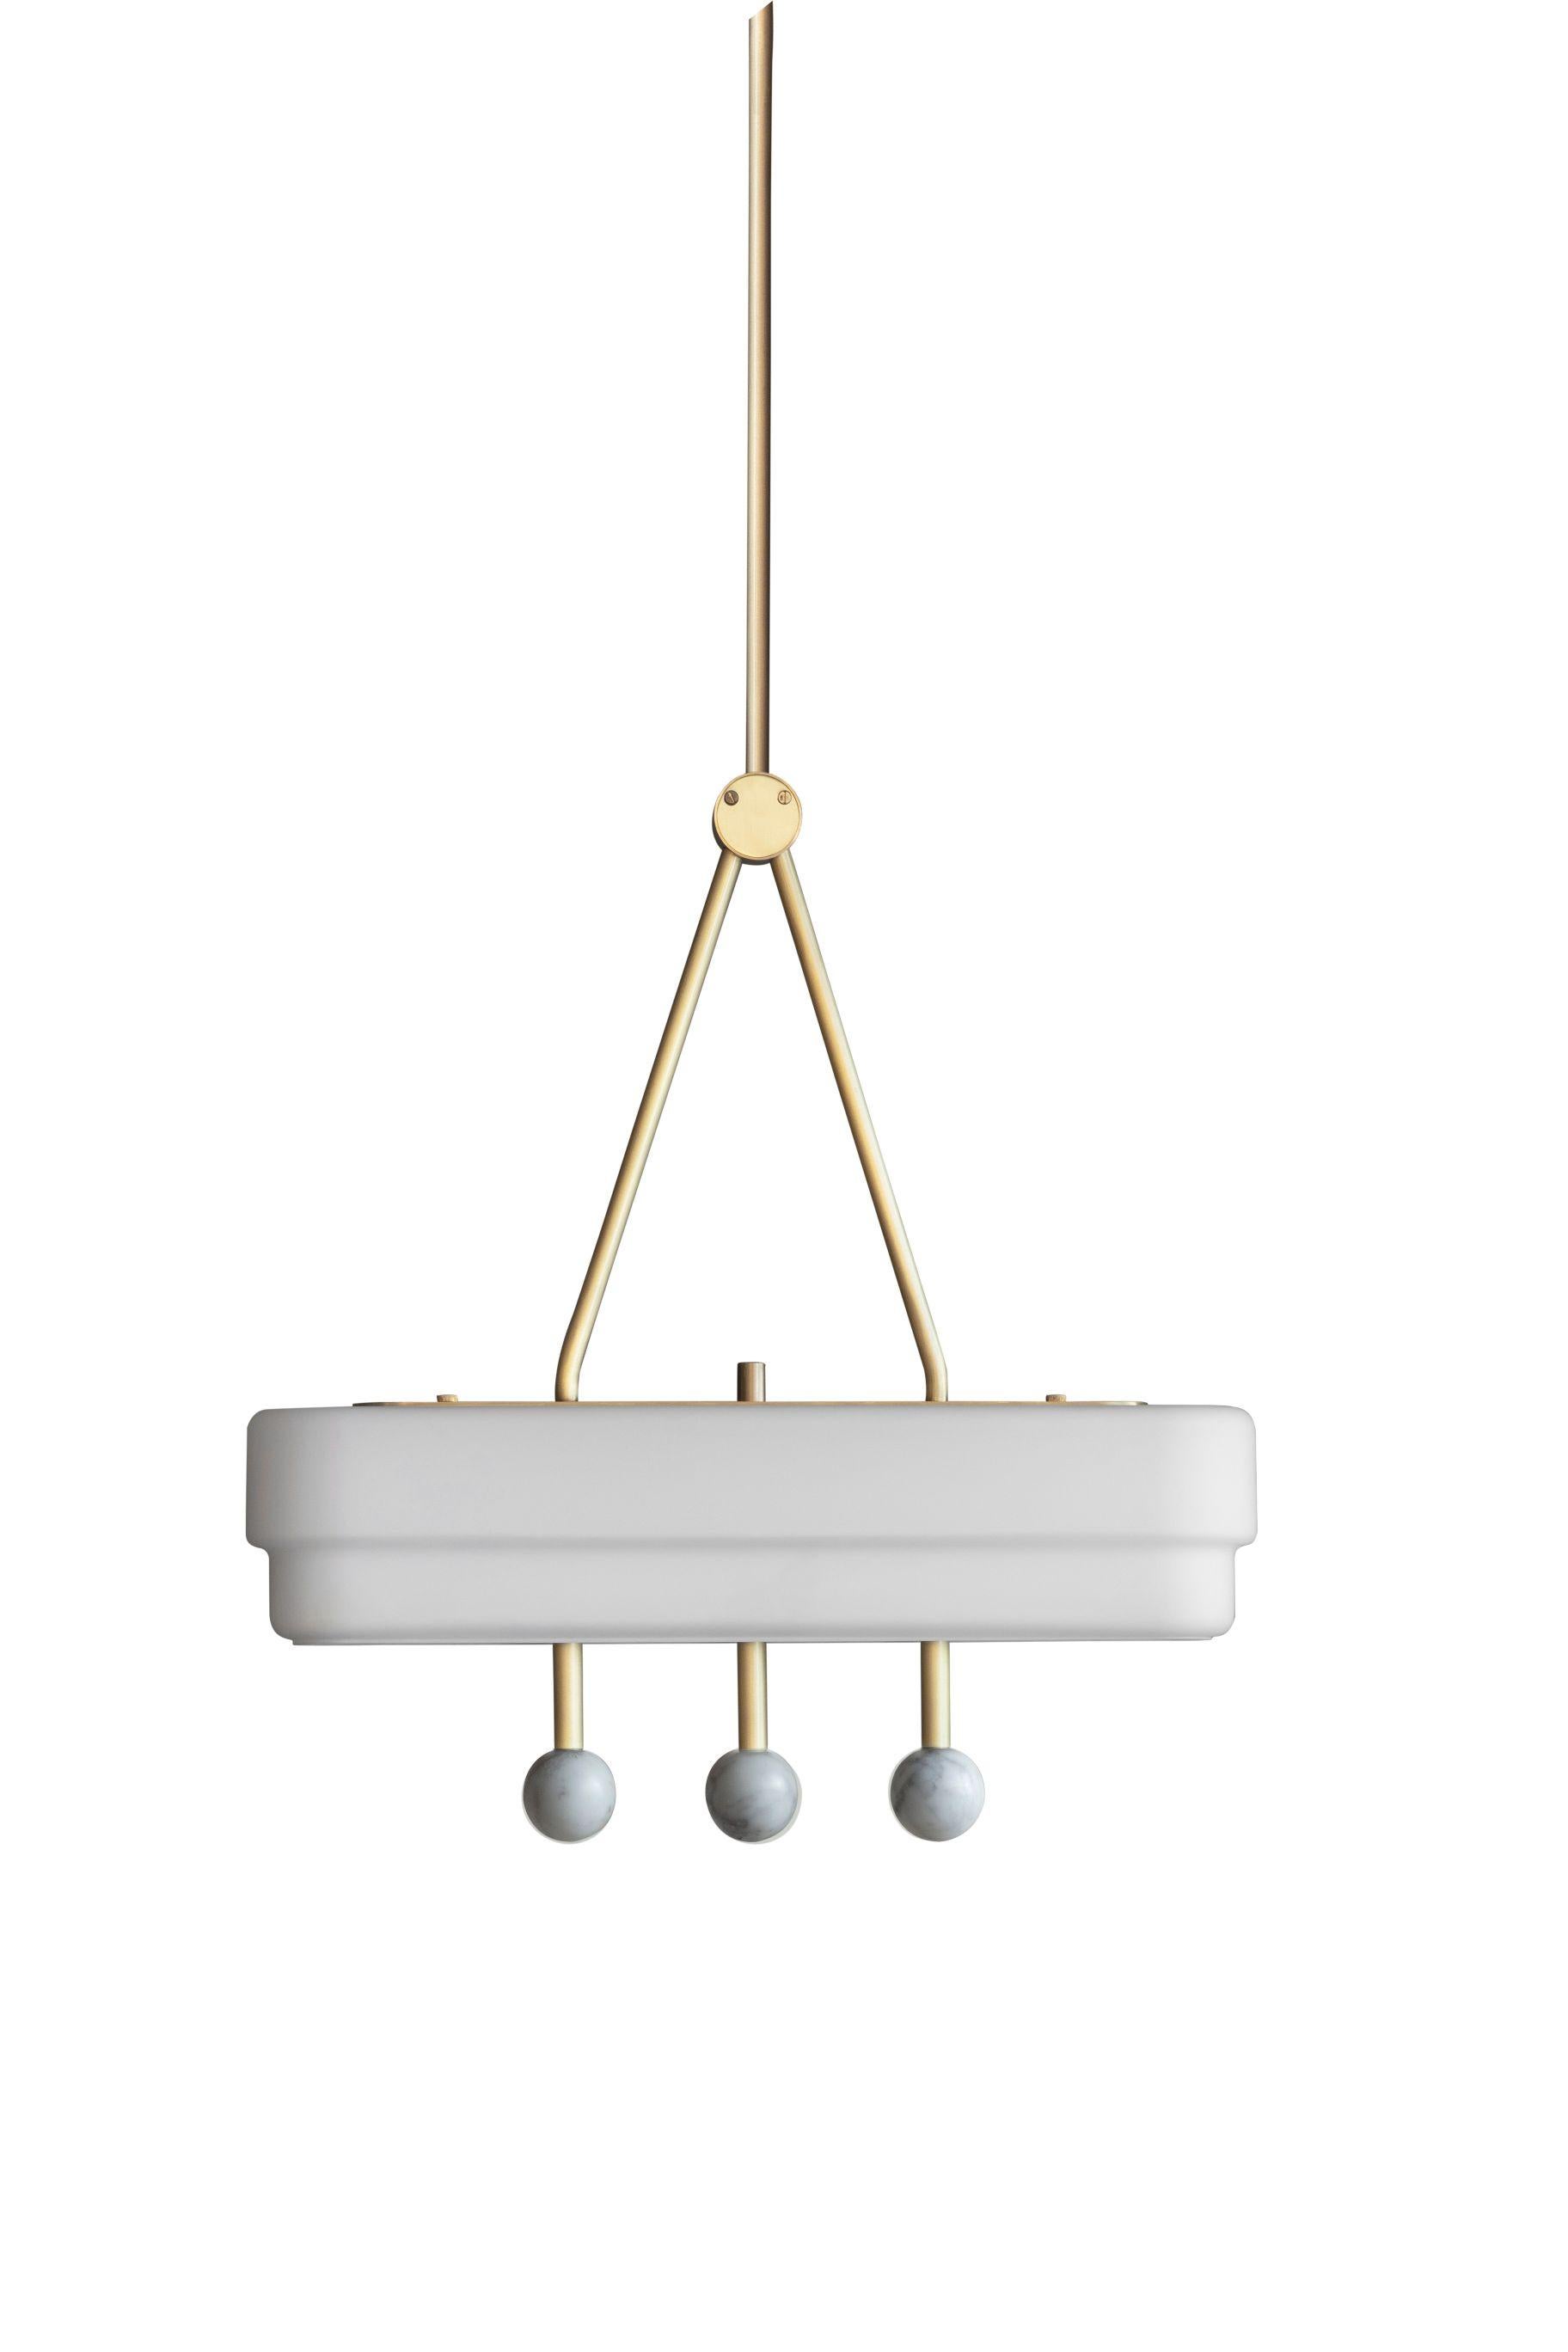 White Spate pendant by Bert Frank
Dimensions: H 44 x W 9 x D 44 cm
Materials: Brass, marble, glass

Available finishes: Bronzed brass, black brass
All our lamps can be wired according to each country. If sold to the USA it will be wired for the